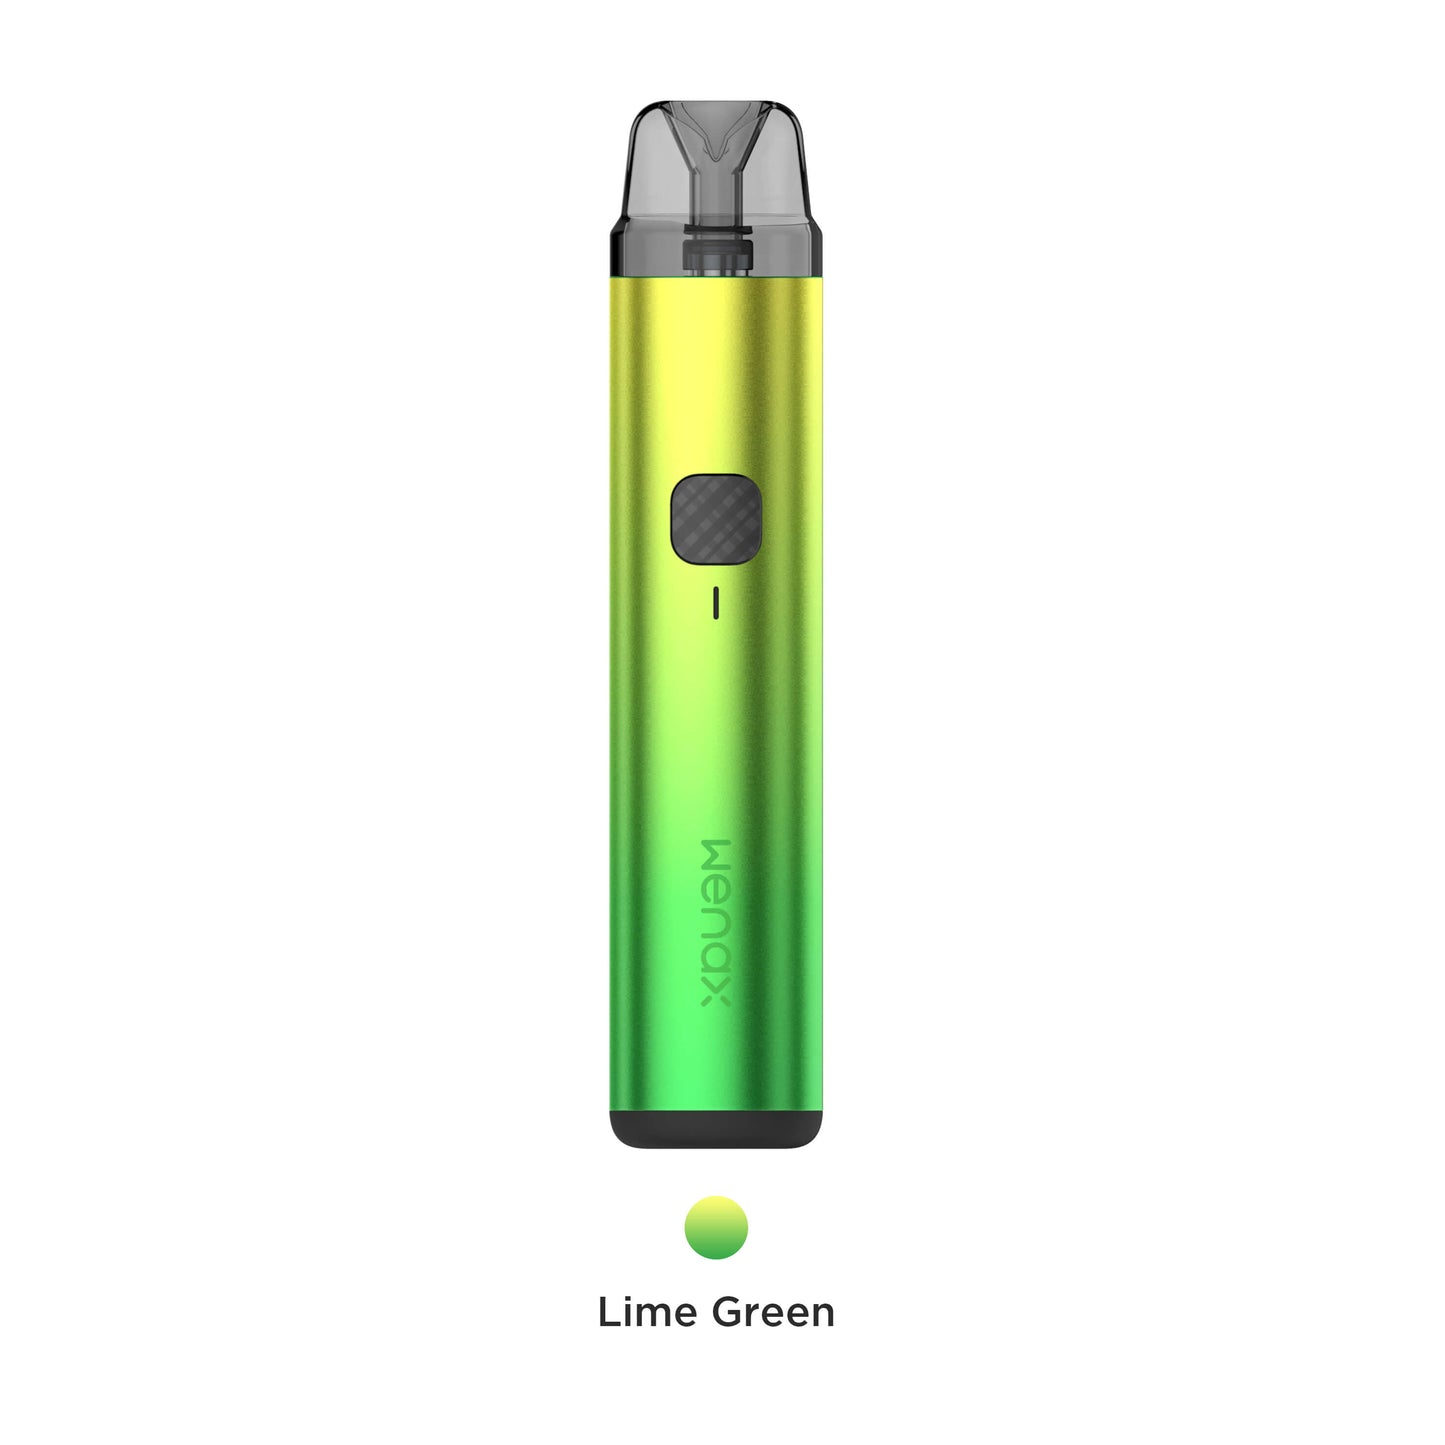 lime green colour pod system